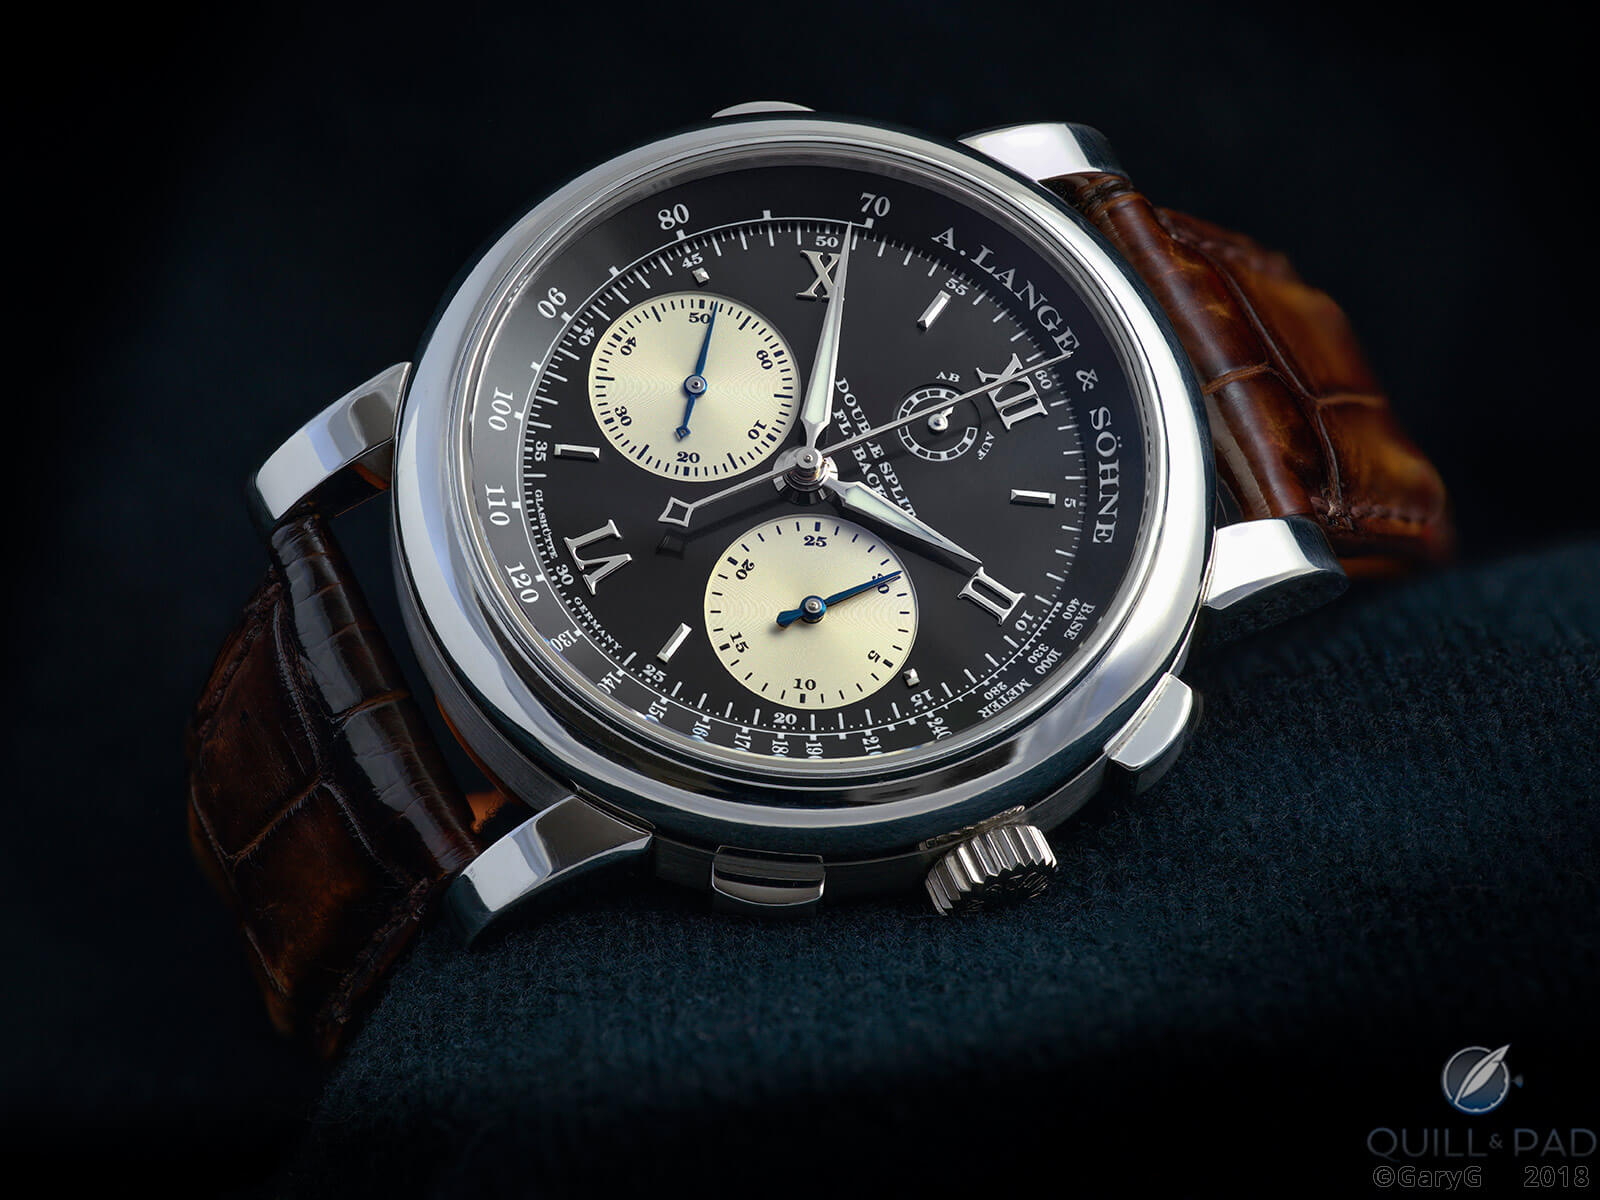 Both useful and mighty: A. Lange & Söhne’s Double Split in platinum